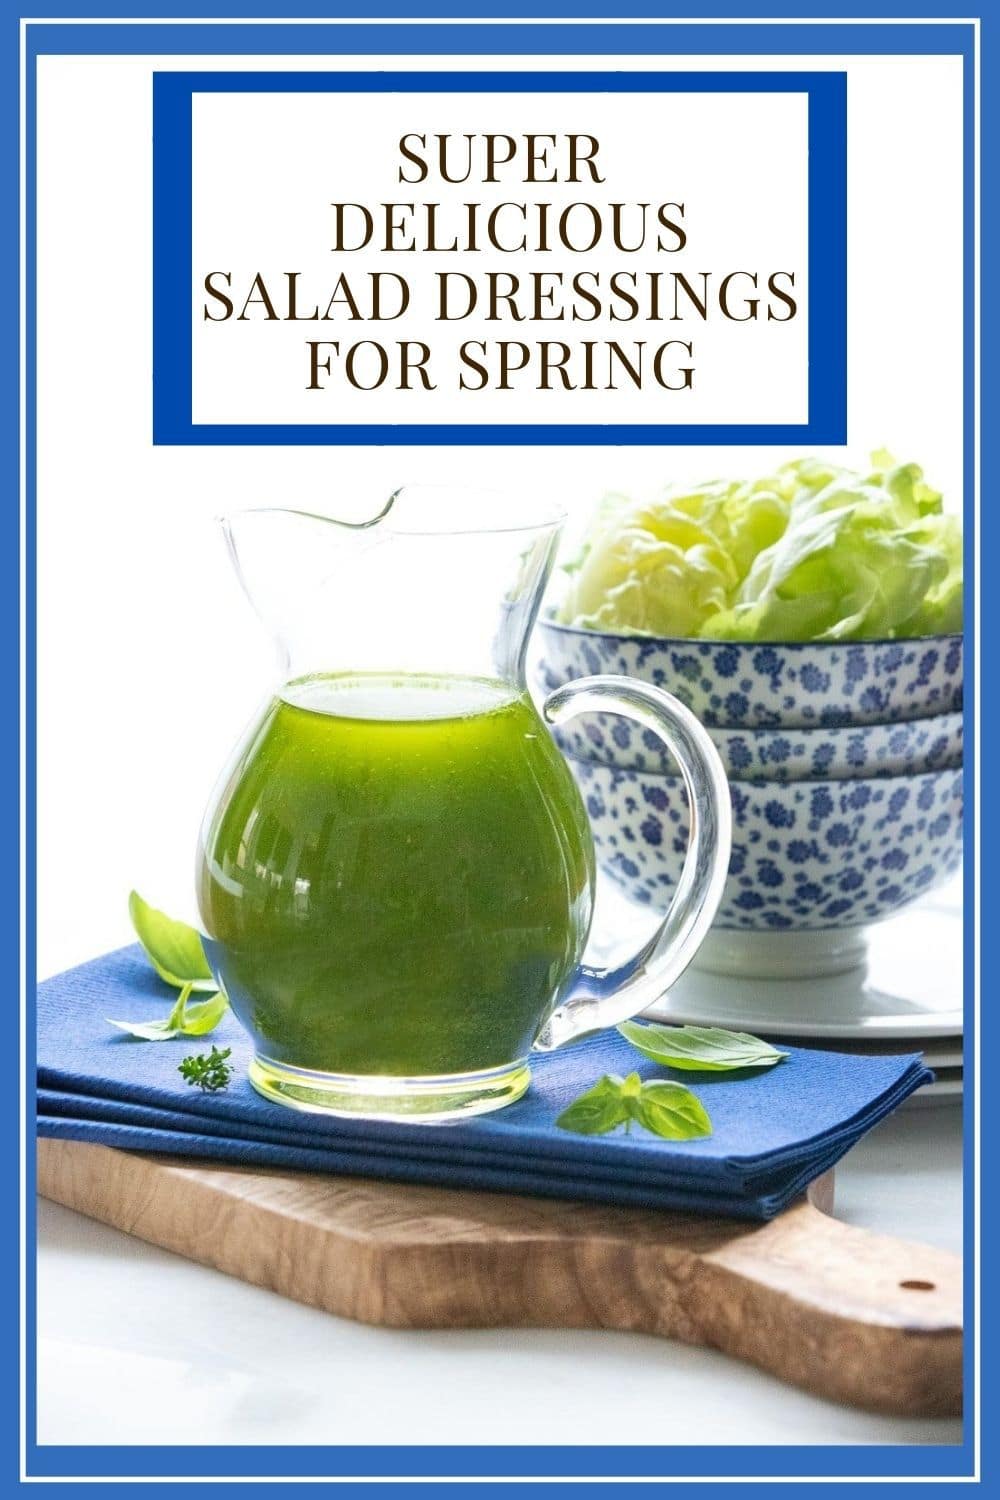 10 Delicious Dressings to Pizazz Up Everyday Salads